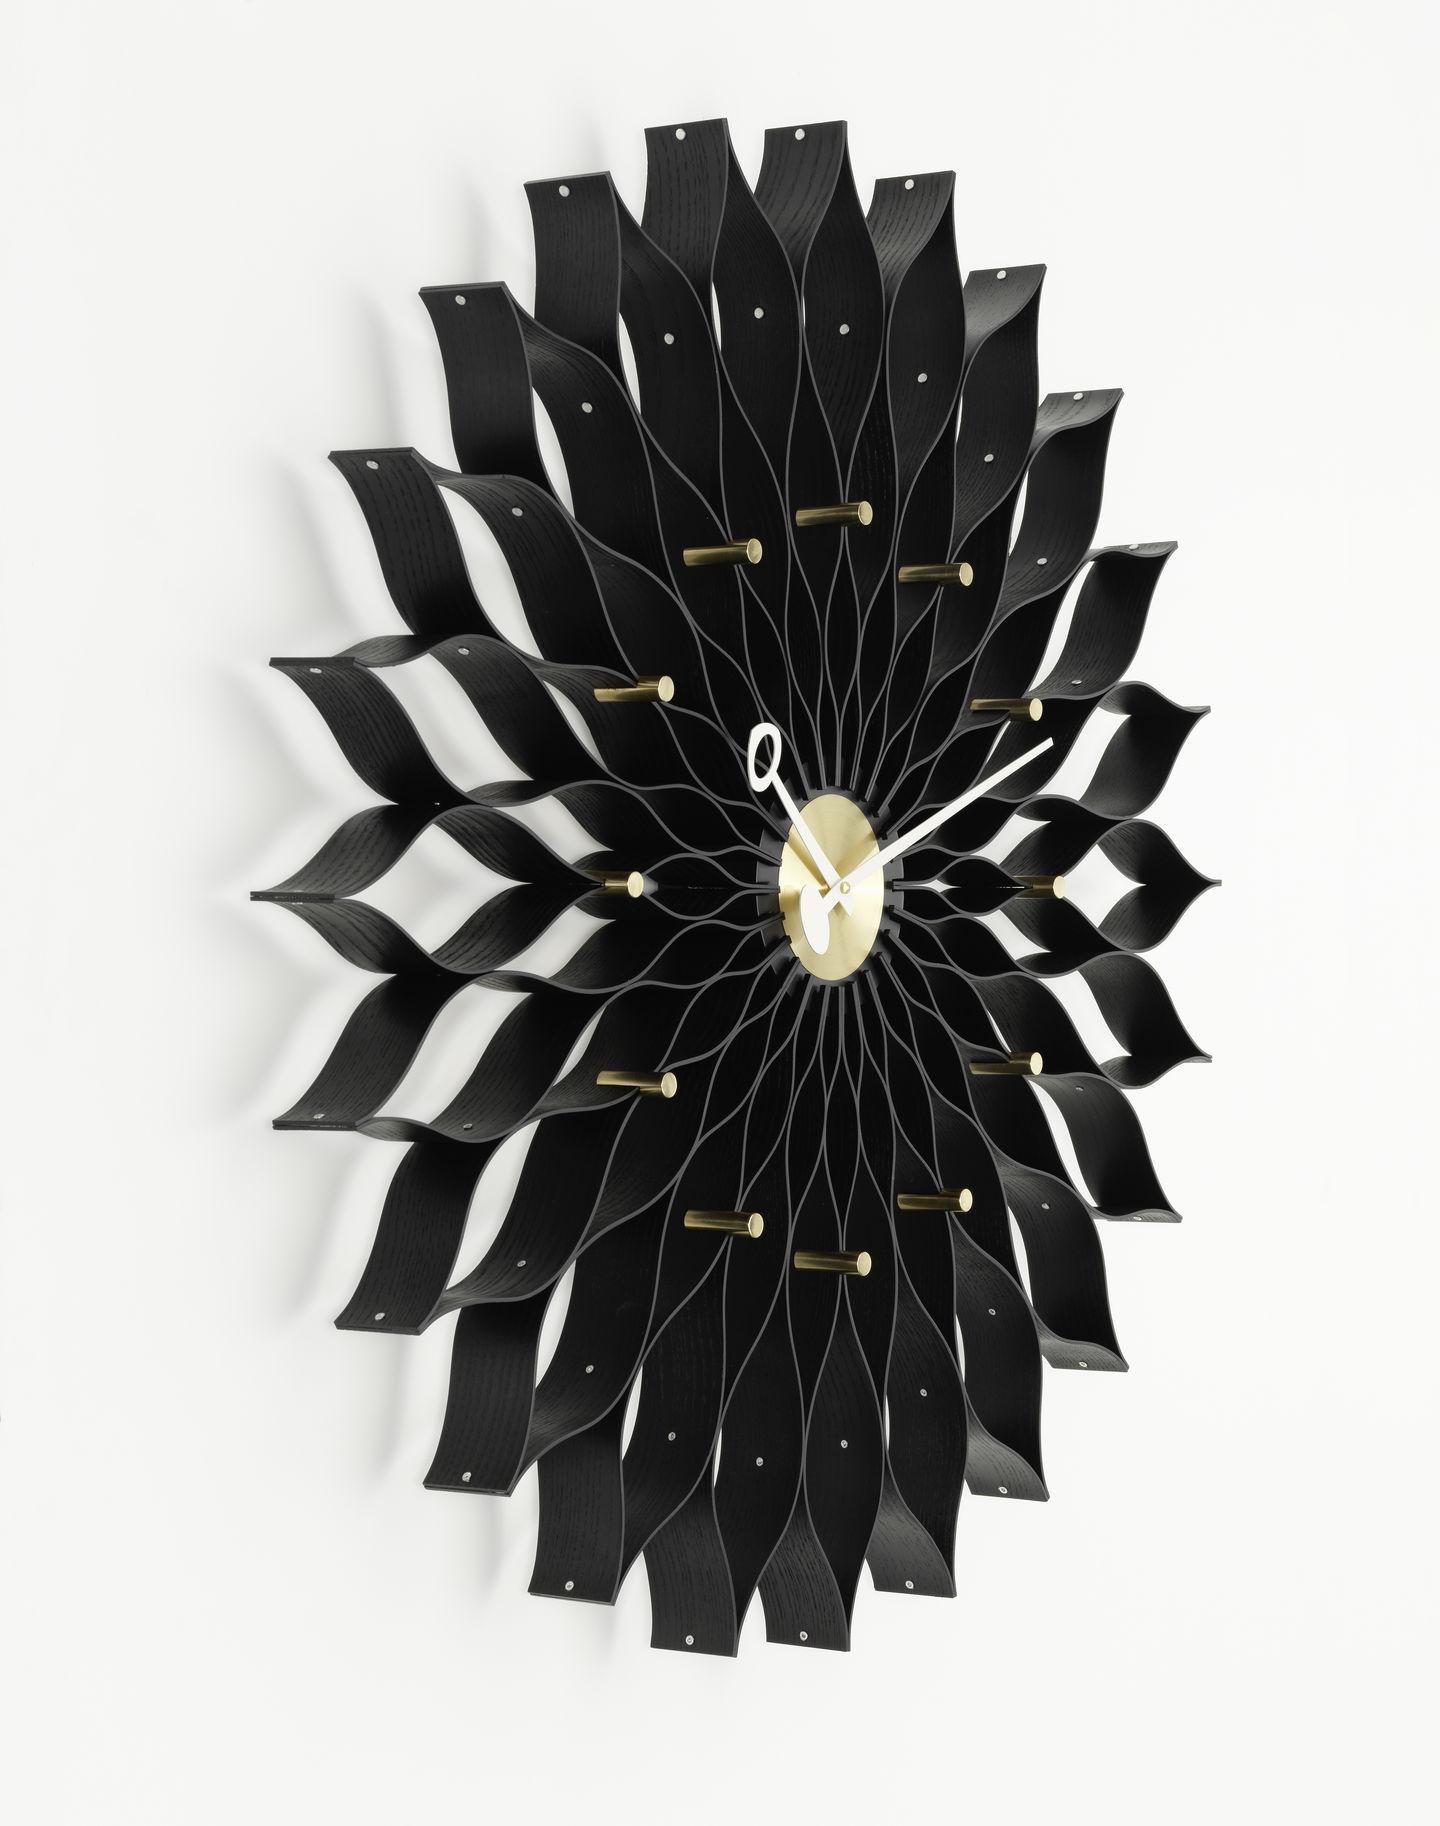 Swiss George Nelson Sunflower Wall Clock, Wood and Metal by Vitra